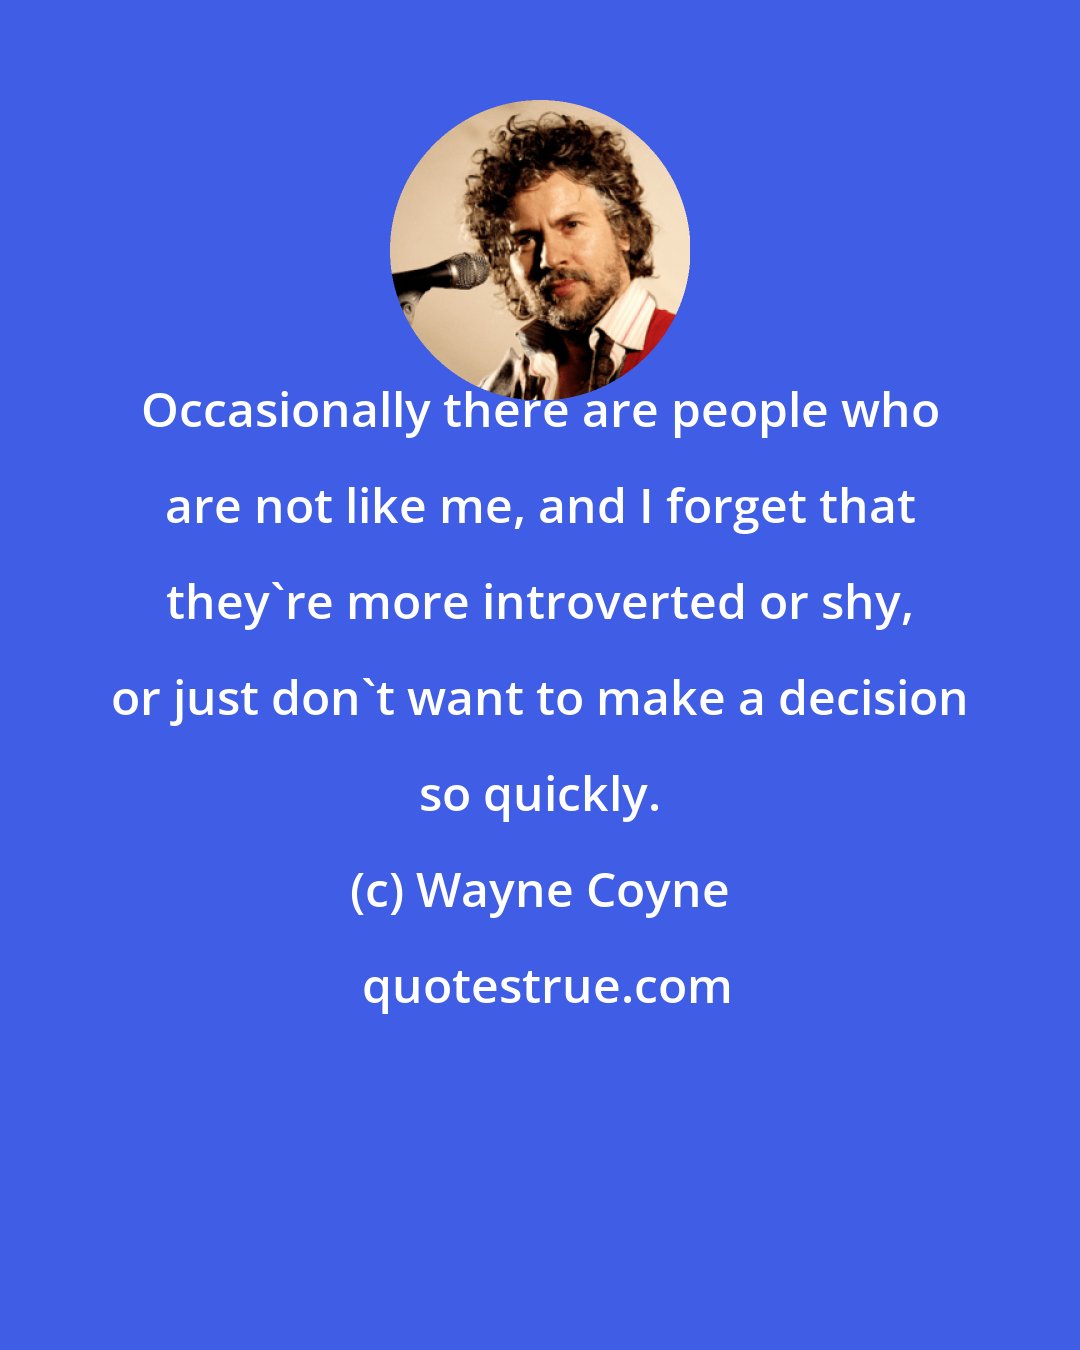 Wayne Coyne: Occasionally there are people who are not like me, and I forget that they're more introverted or shy, or just don't want to make a decision so quickly.